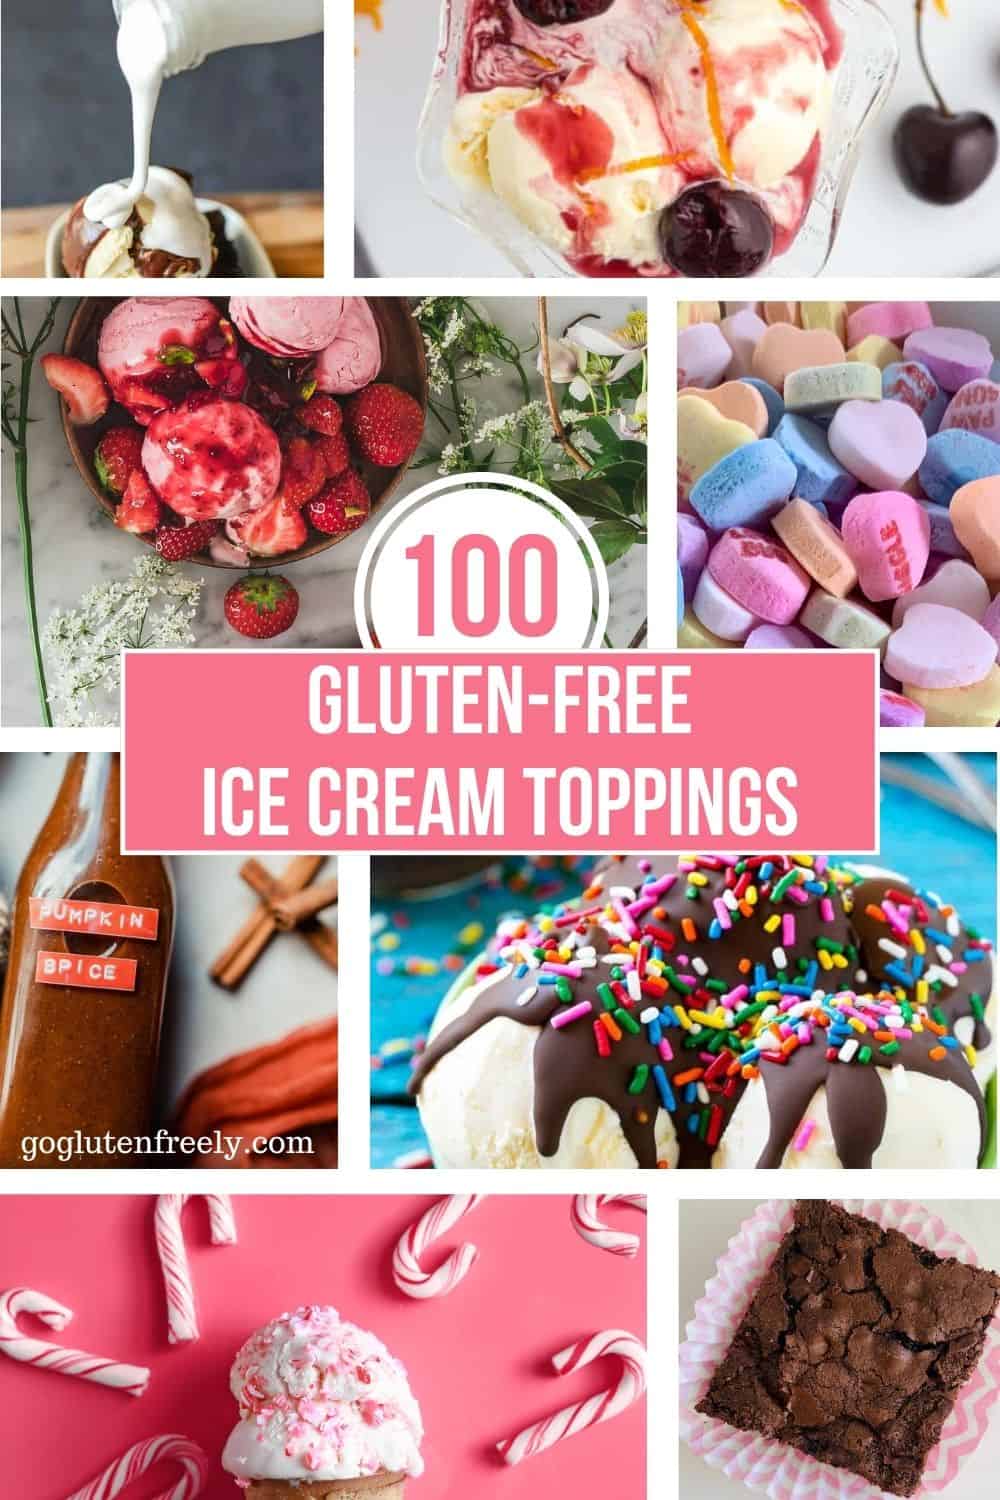 Text: 100 Gluten-Free Ice Cream Toppings. Photos include: marshmallow sauce, cherries jubilee ice cream, ice cream with strawberry sauce, candy conversation hearts, pumpkin spice syrup, ice cream with magic shell topping, candy cane ice cream, and a brownie.